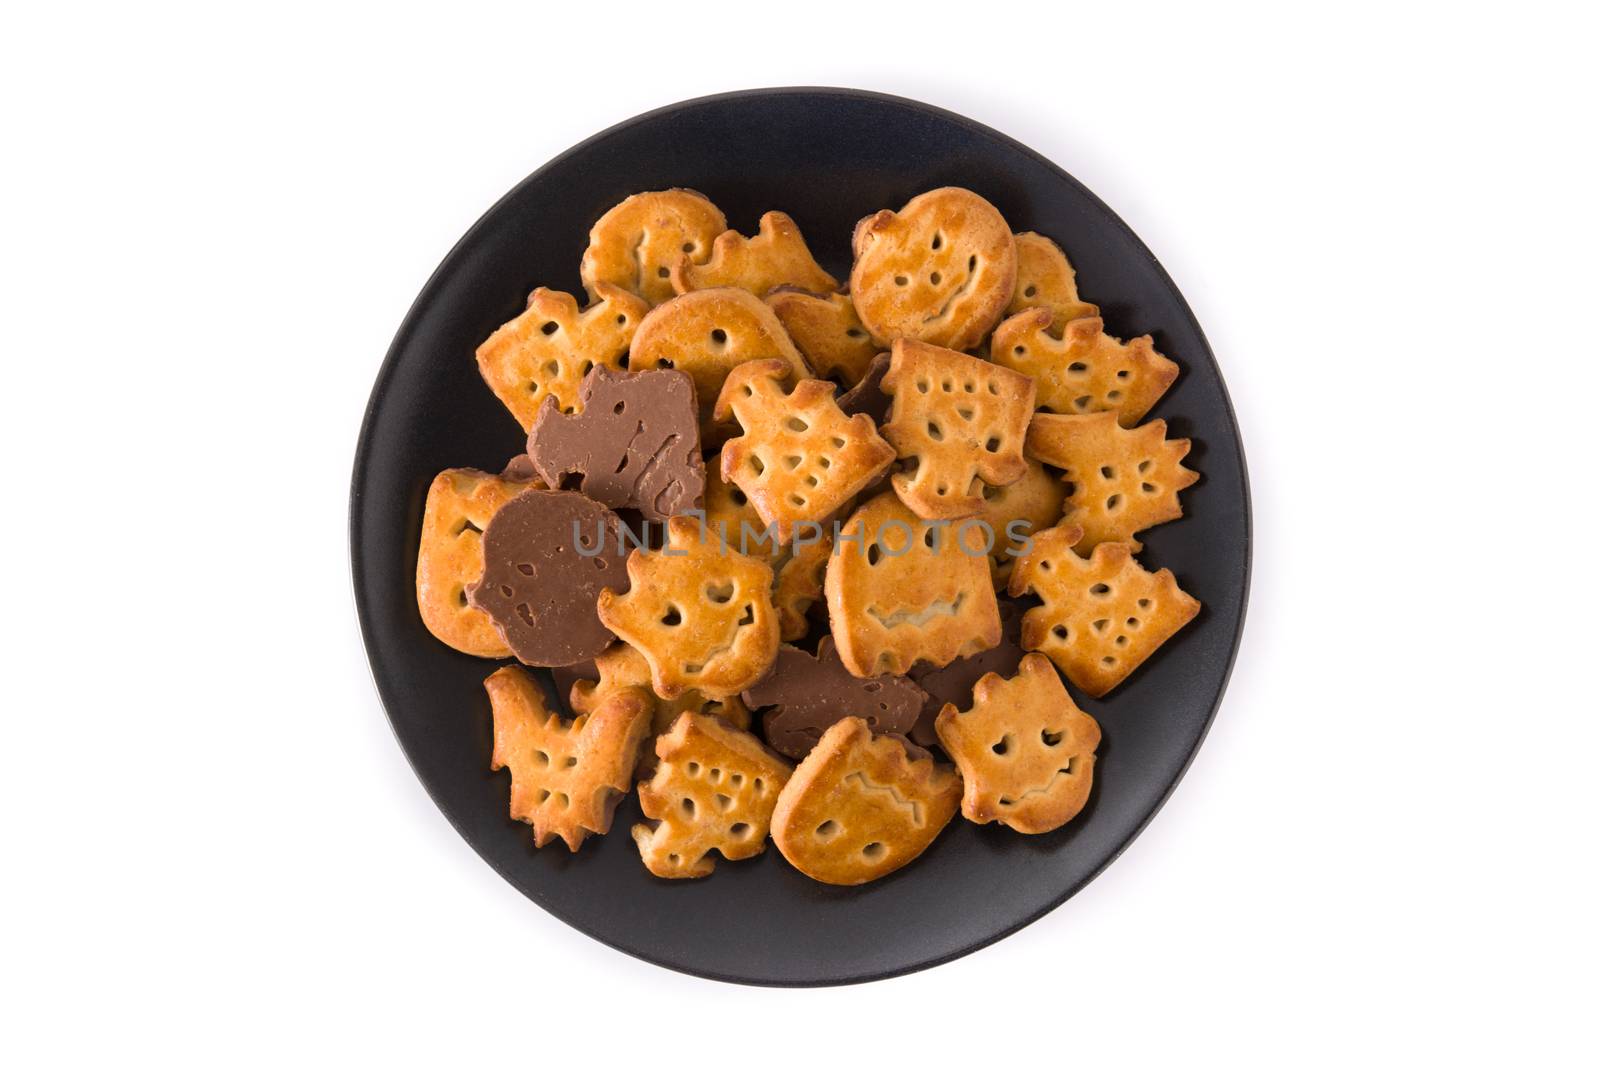 Halloween cookies on black plate isolated on white background